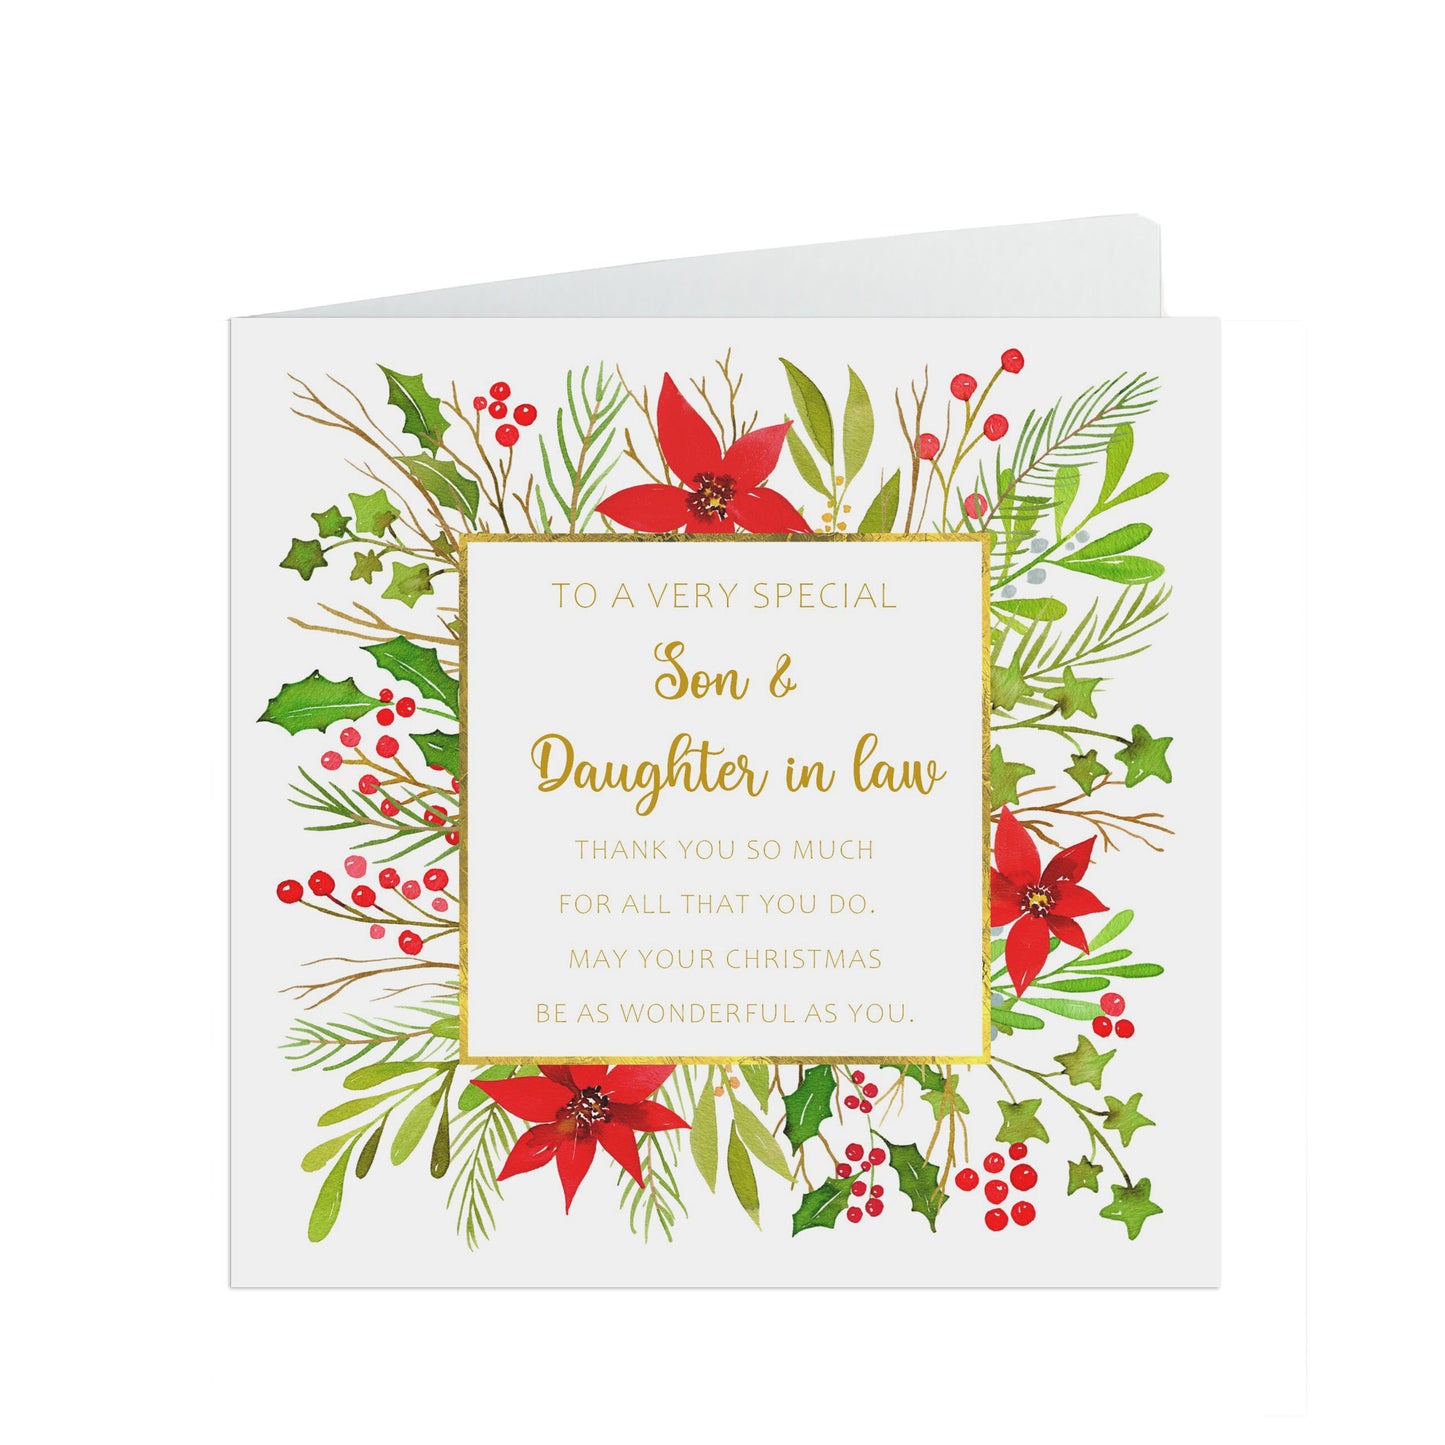 Son And Daughter In Law Christmas Card, Traditional Poinsettia Design